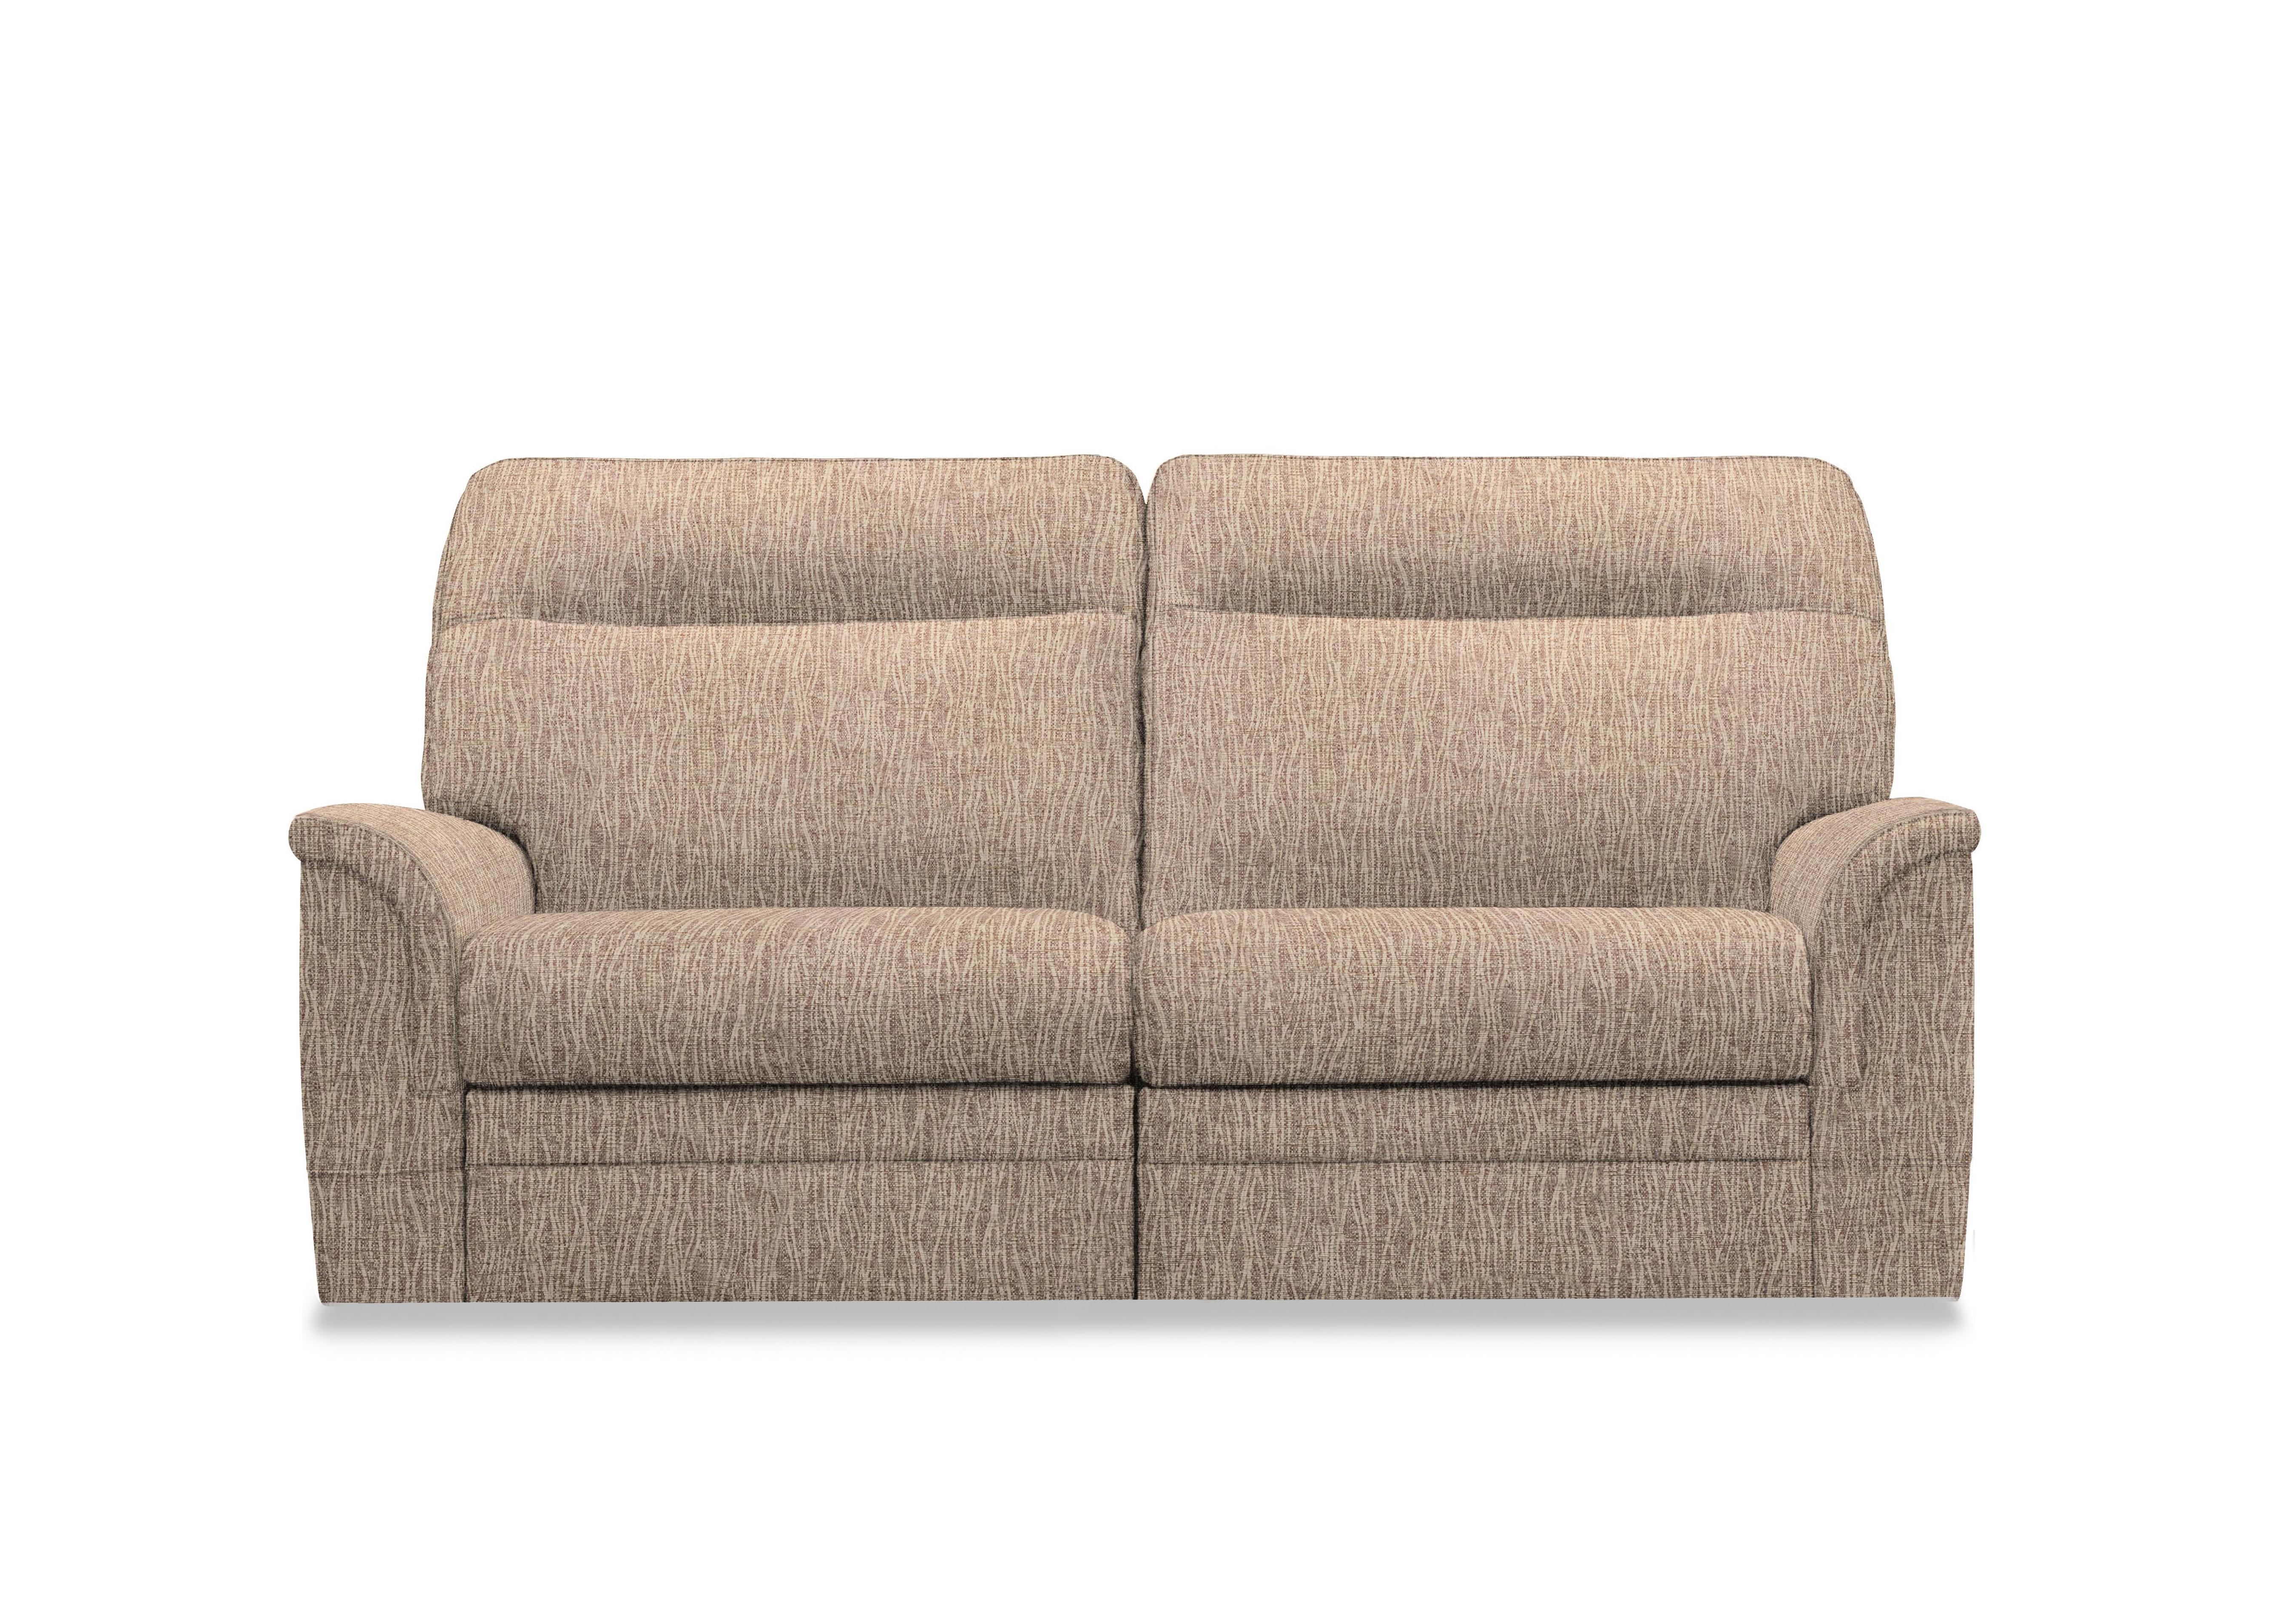 Hudson 23 Large 2 Seater Fabric Power Recliner Sofa with Power Headrests and Power Lumbar in Dune Sand 001482-0054 on Furniture Village